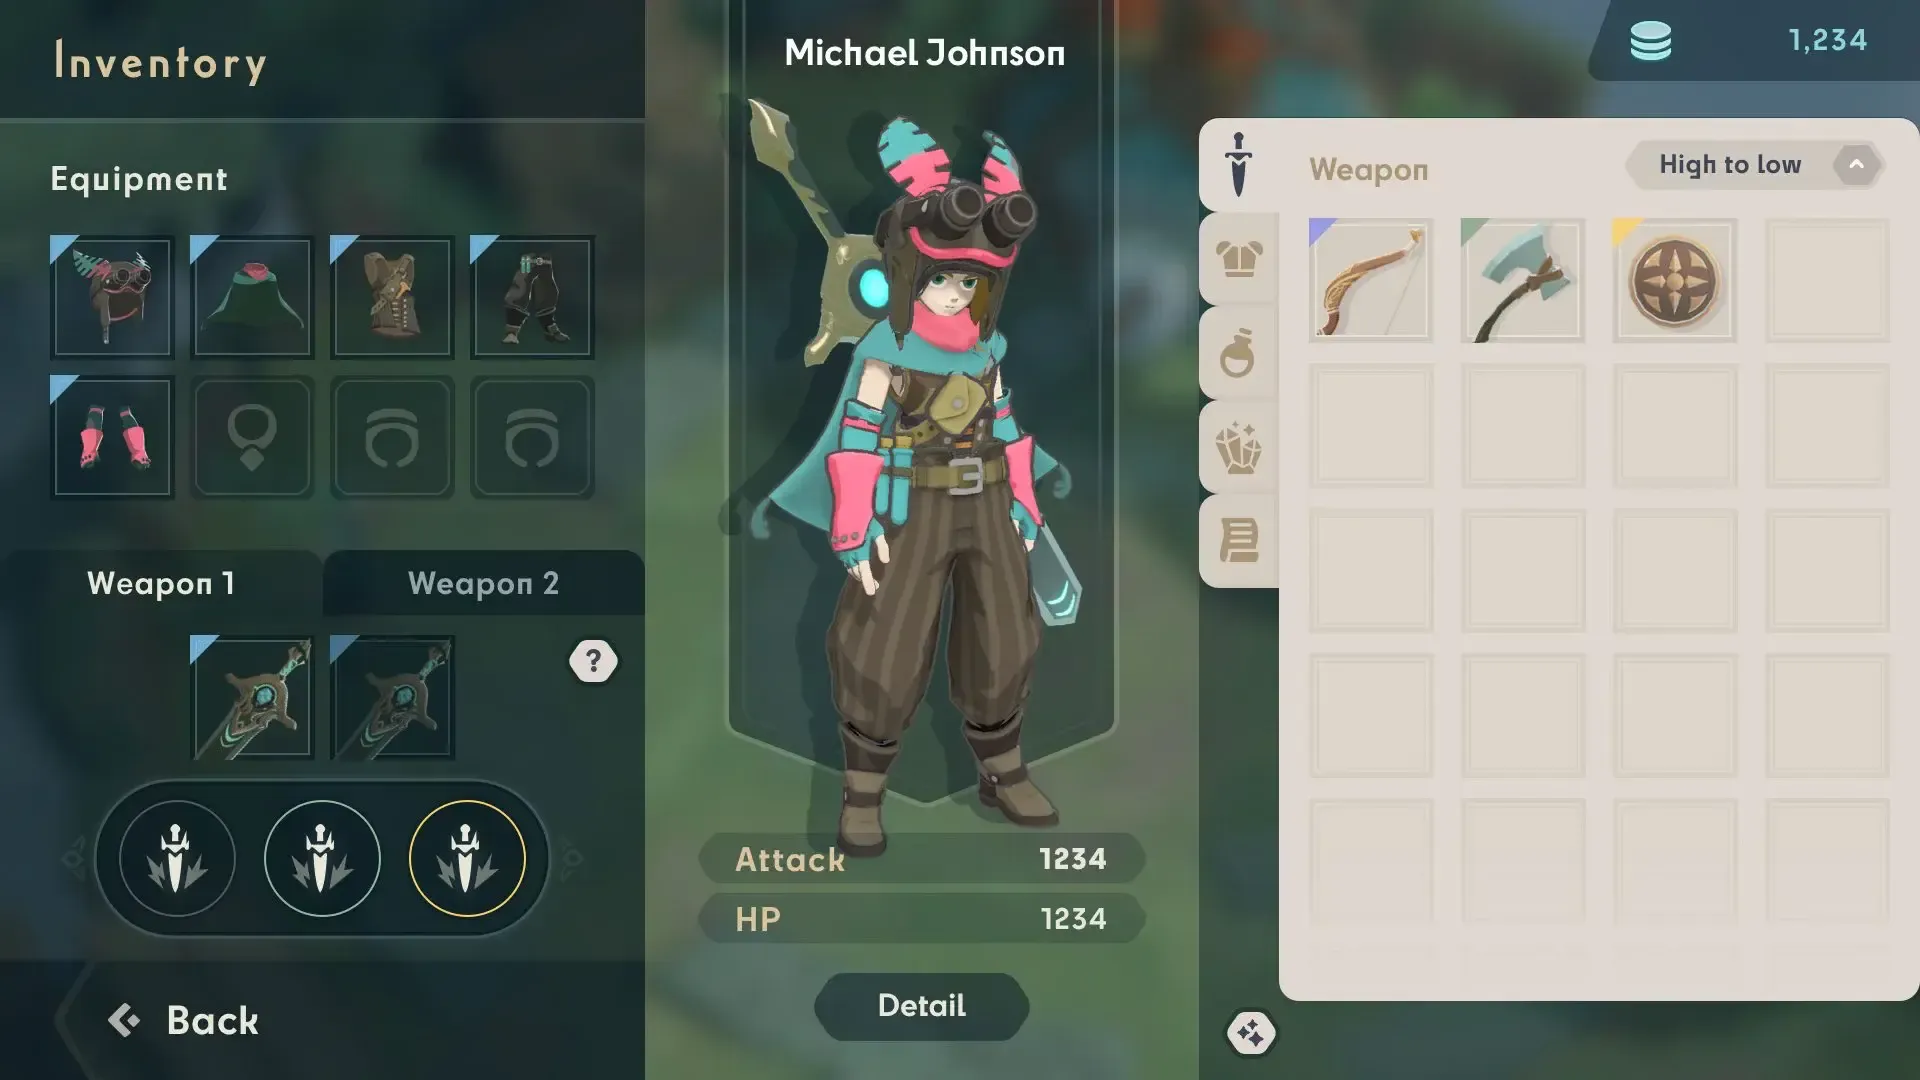 Treeverse Inventory shows all the weapons and armors, along with accessories and items collected in the game. You can also view your attack power and HP in this tab